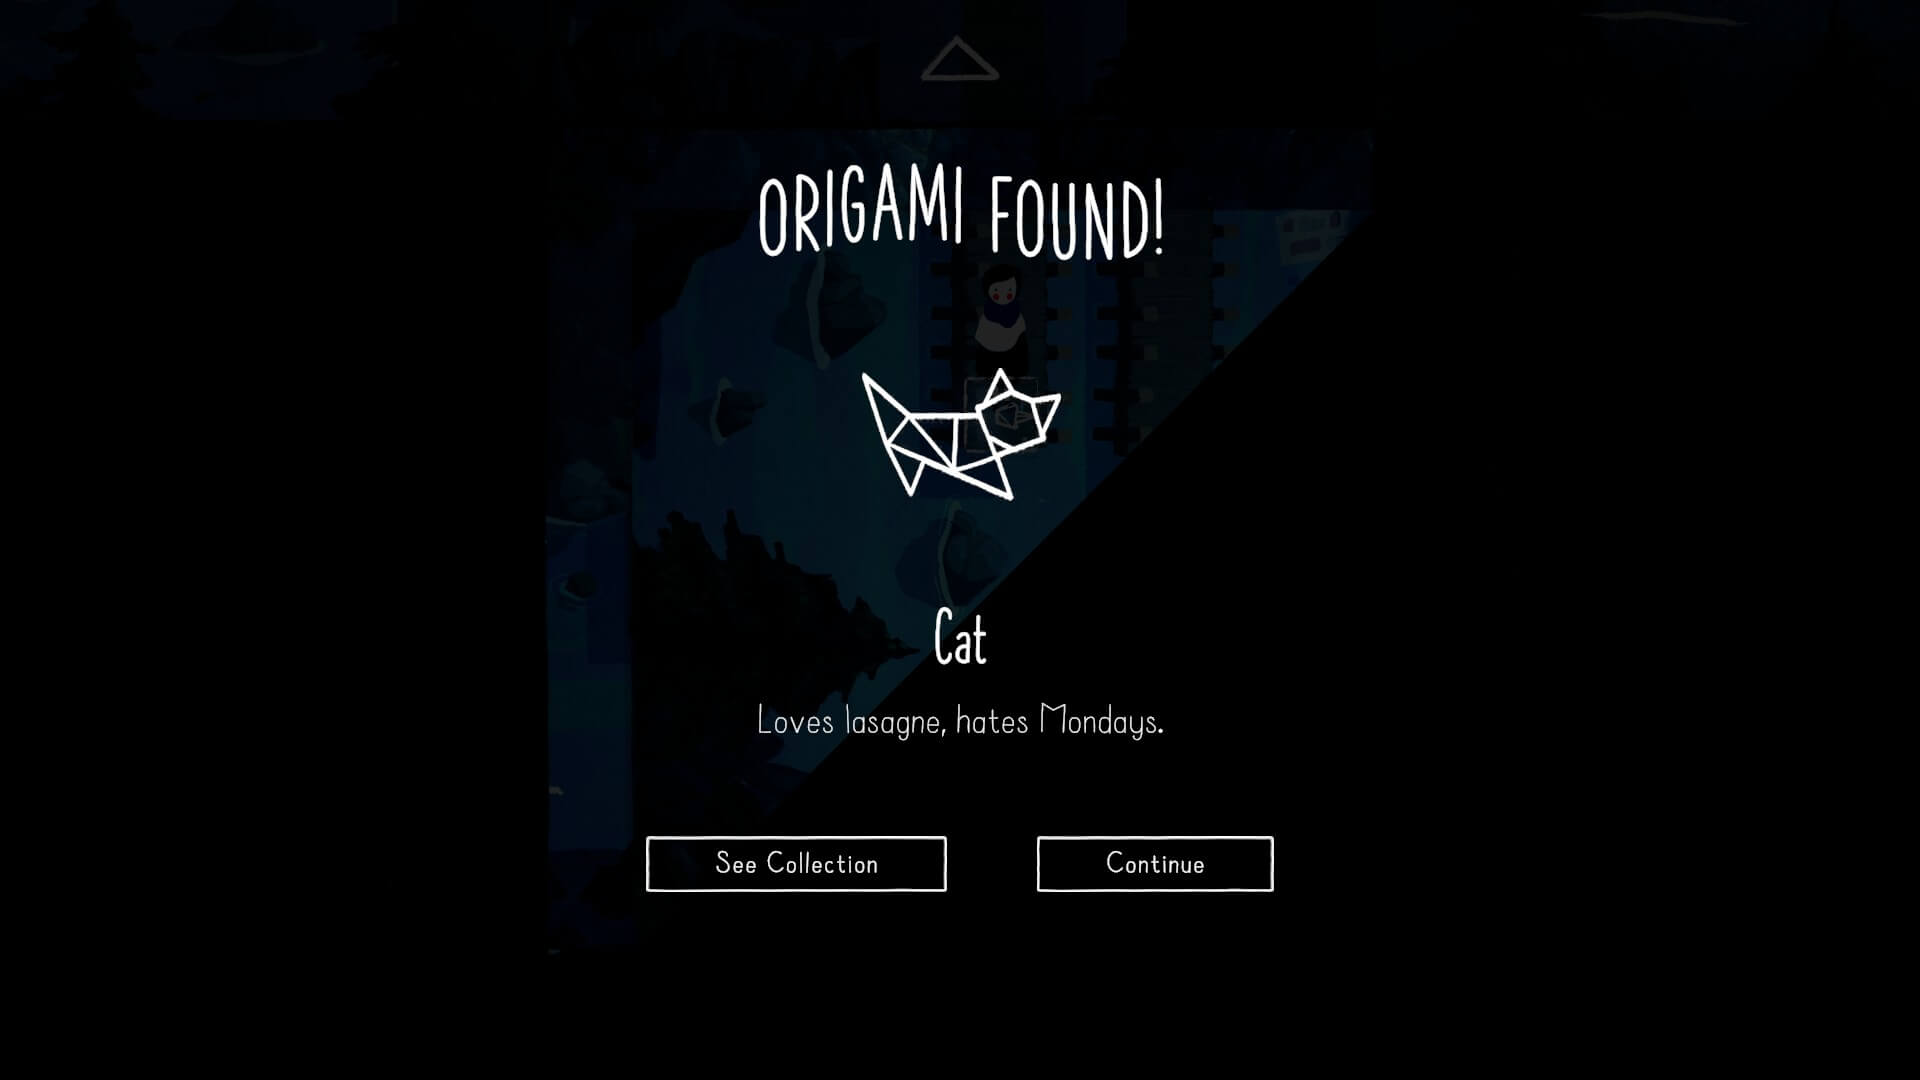 The image says 'origami found' and there is a small symbol of an origami cat. This is the first collectible in the game